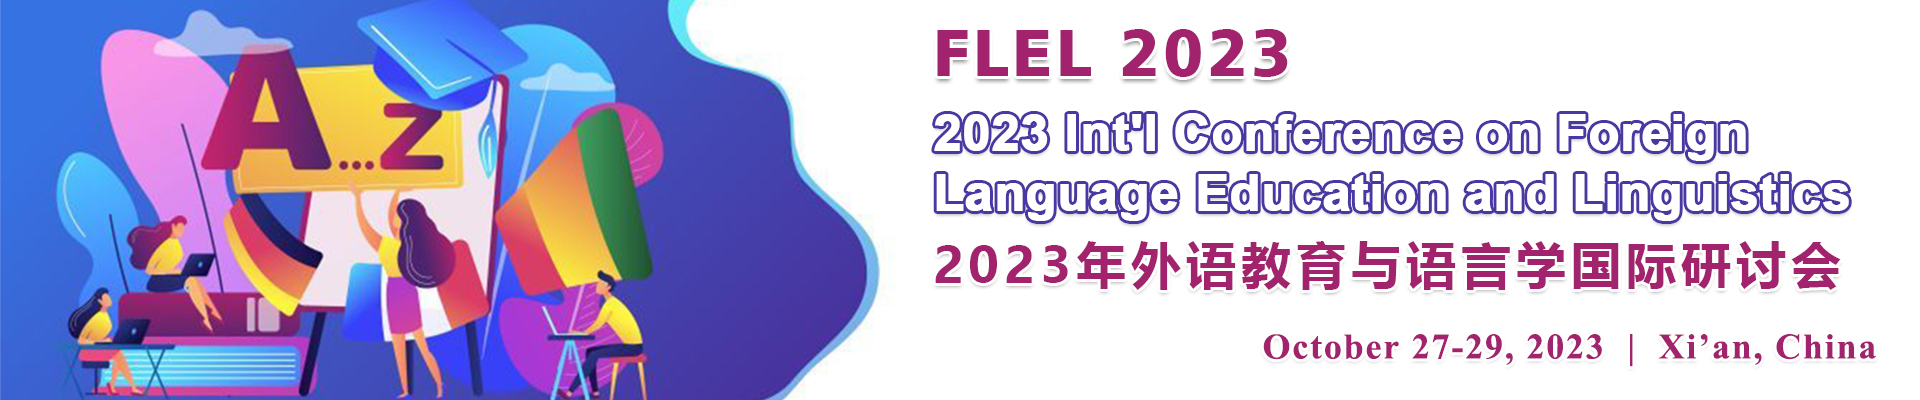 2023 Int'l Conference on Foreign Language Education and Linguistics (FLEL 2023), Xi'an, Shaanxi, China